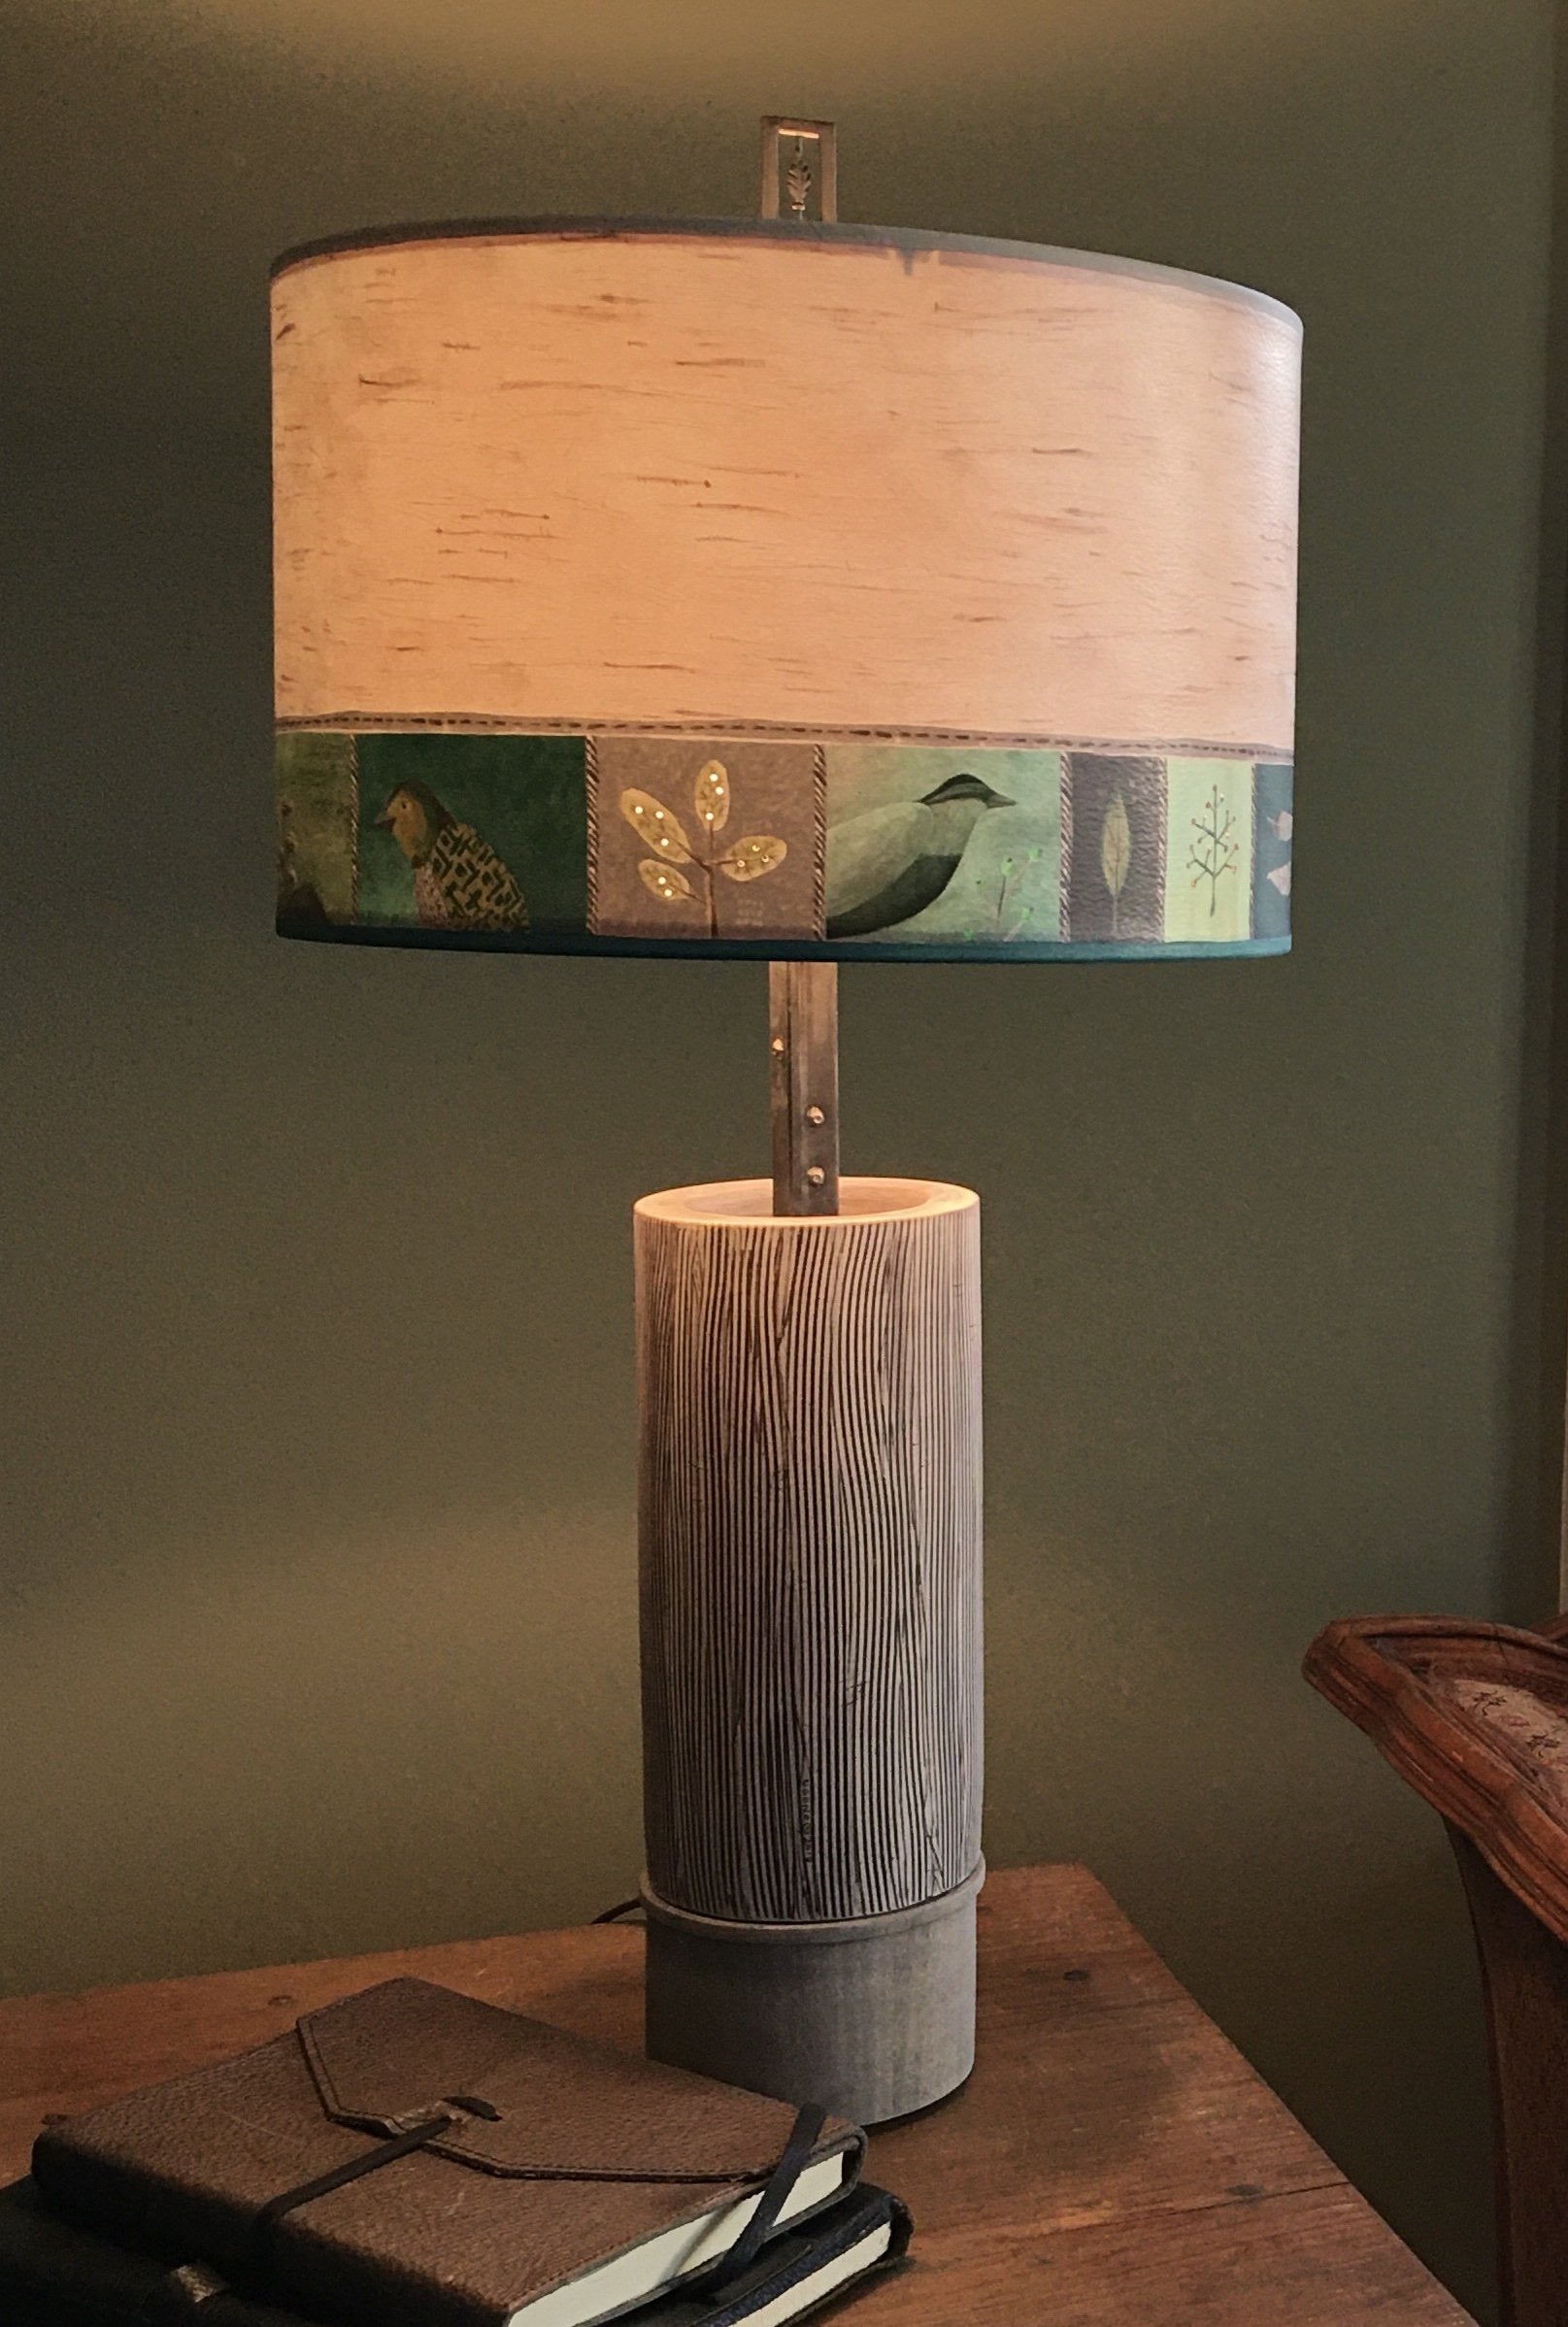 Janna Ugone & Co Table Lamps Ceramic and Wood Table Lamp with Large Drum Shade in Woodland Trail in Birch